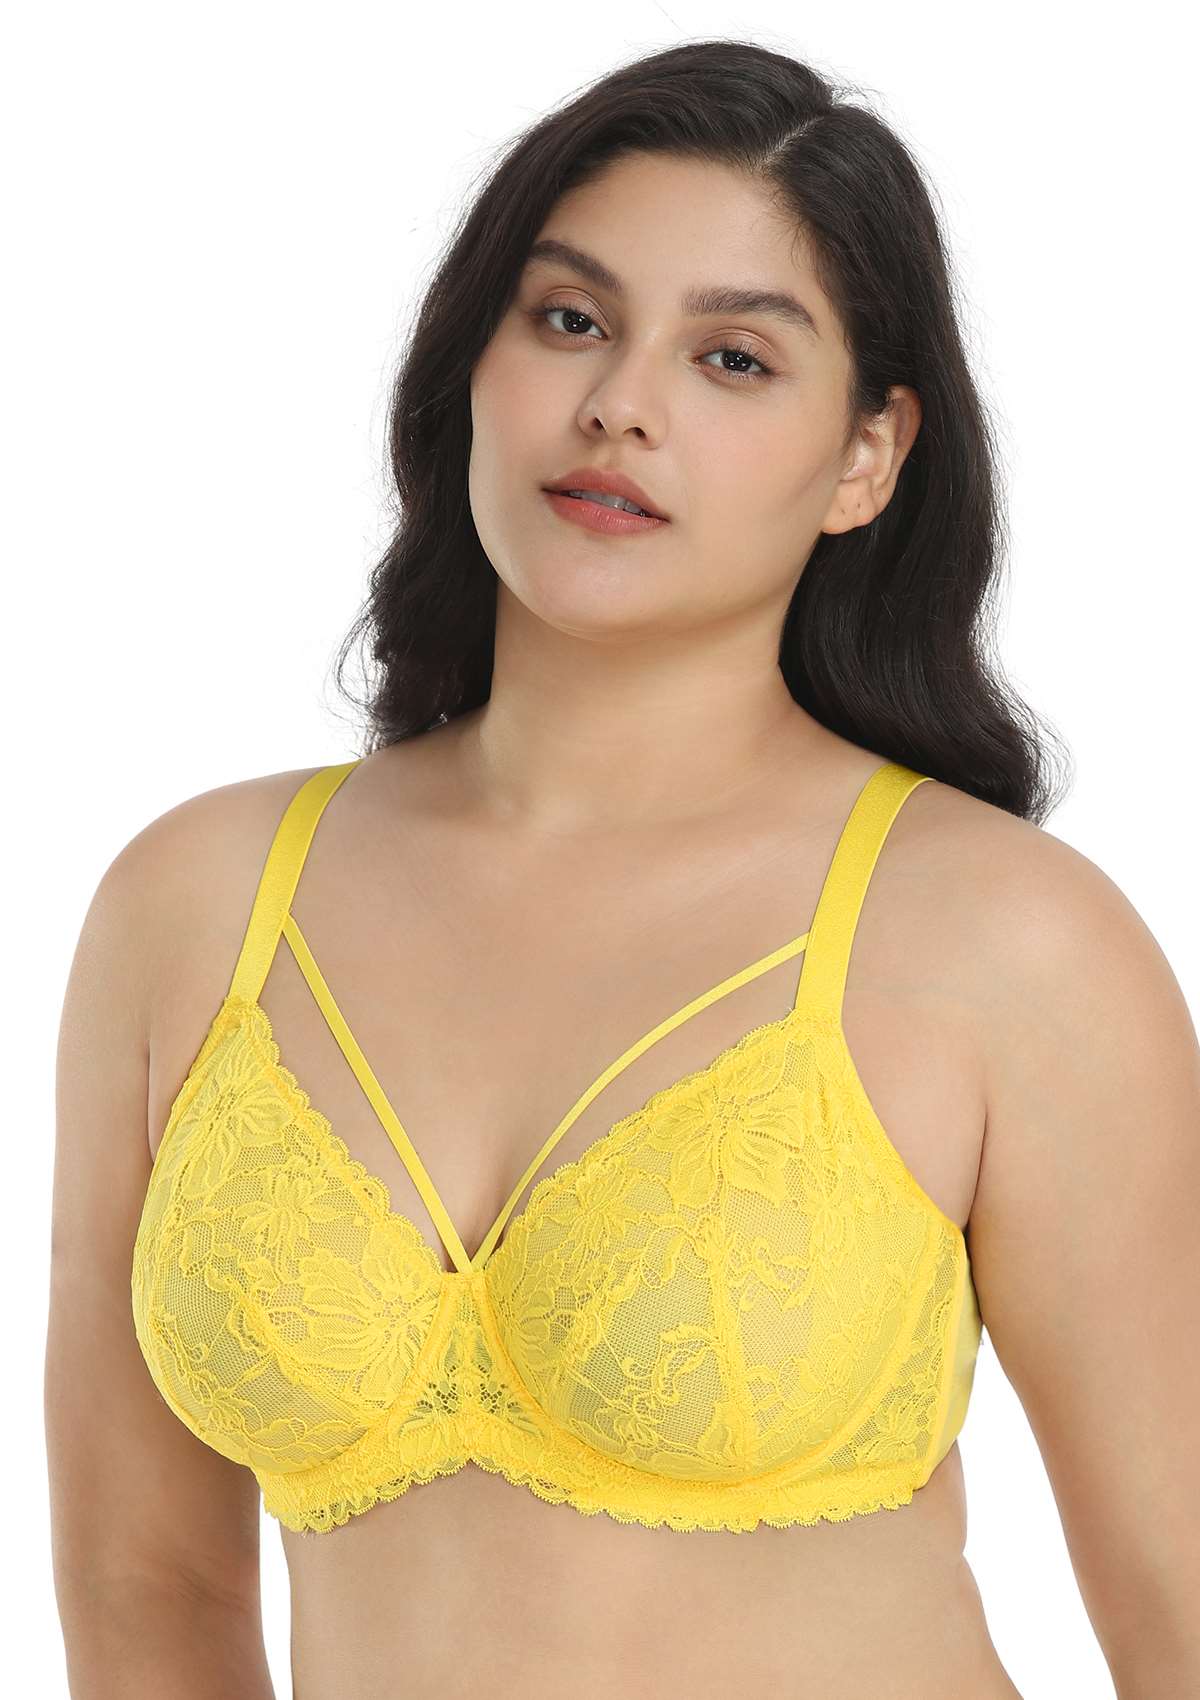 HSIA Unlined Lace Mesh Minimizer Bra For Large Breasts, Full Coverage - Bright Yellow / 42 / DDD/F